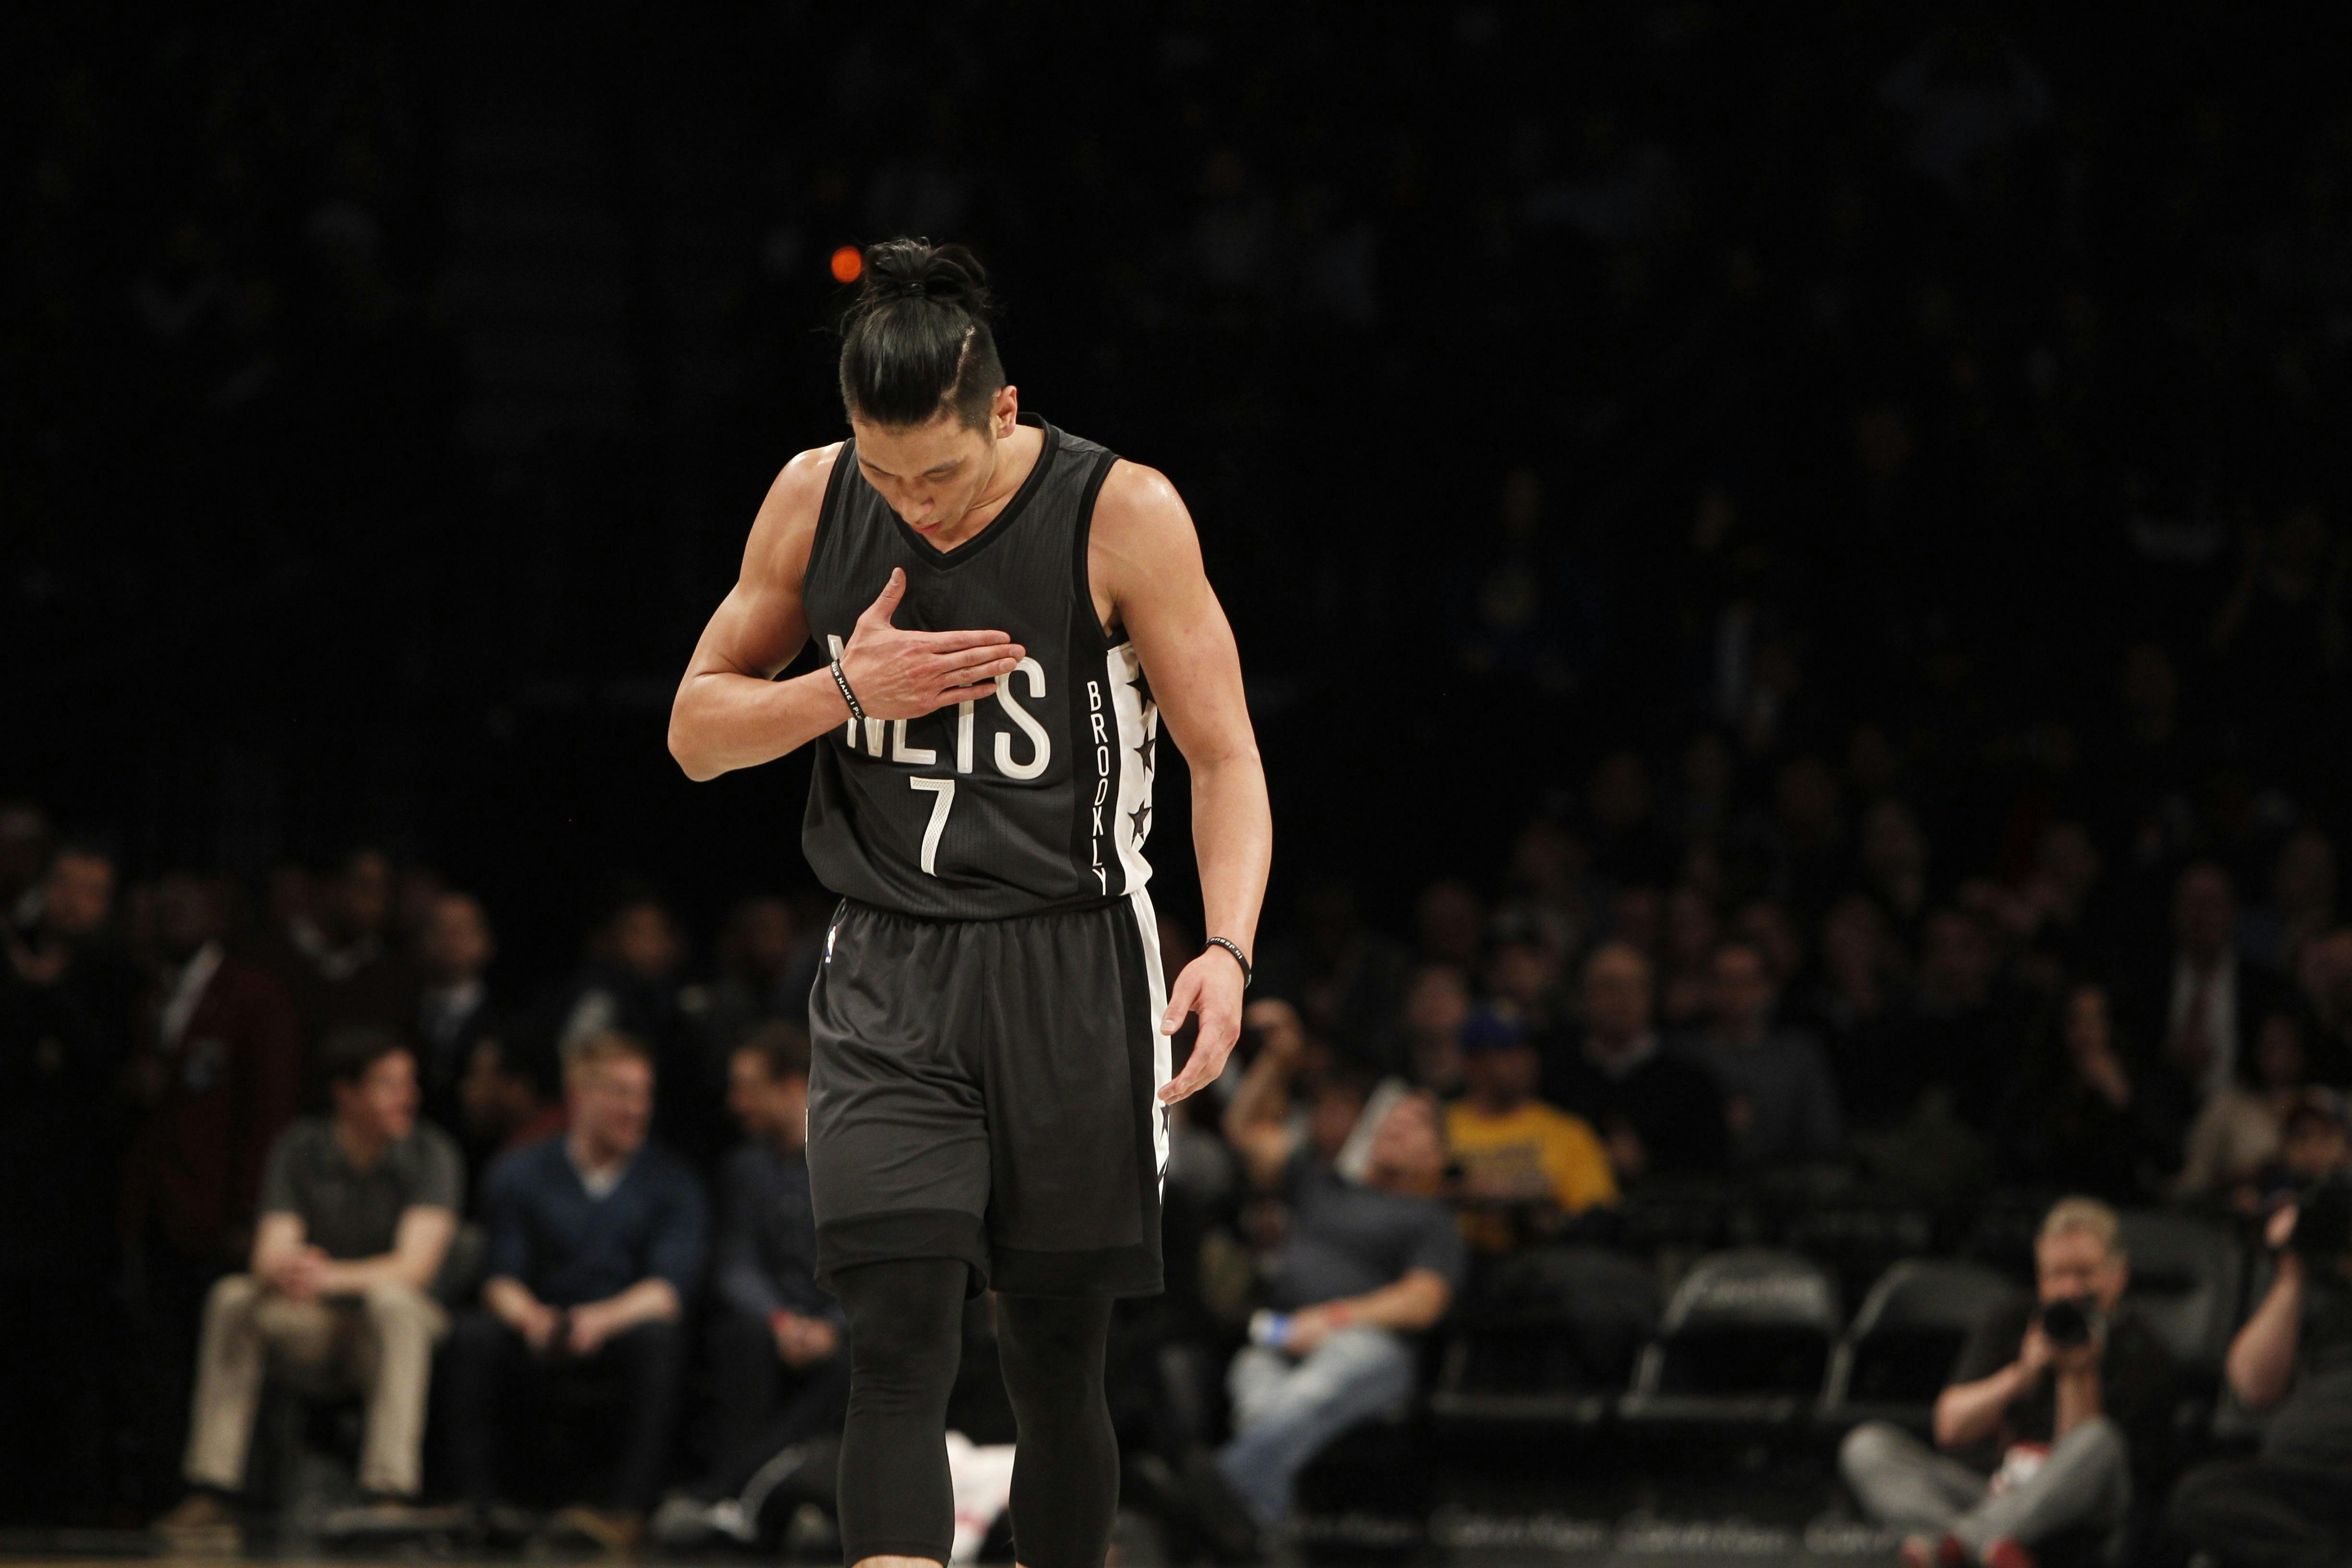 Chinese blogger claims Jeremy Lin will play in Taiwan, Taiwan News